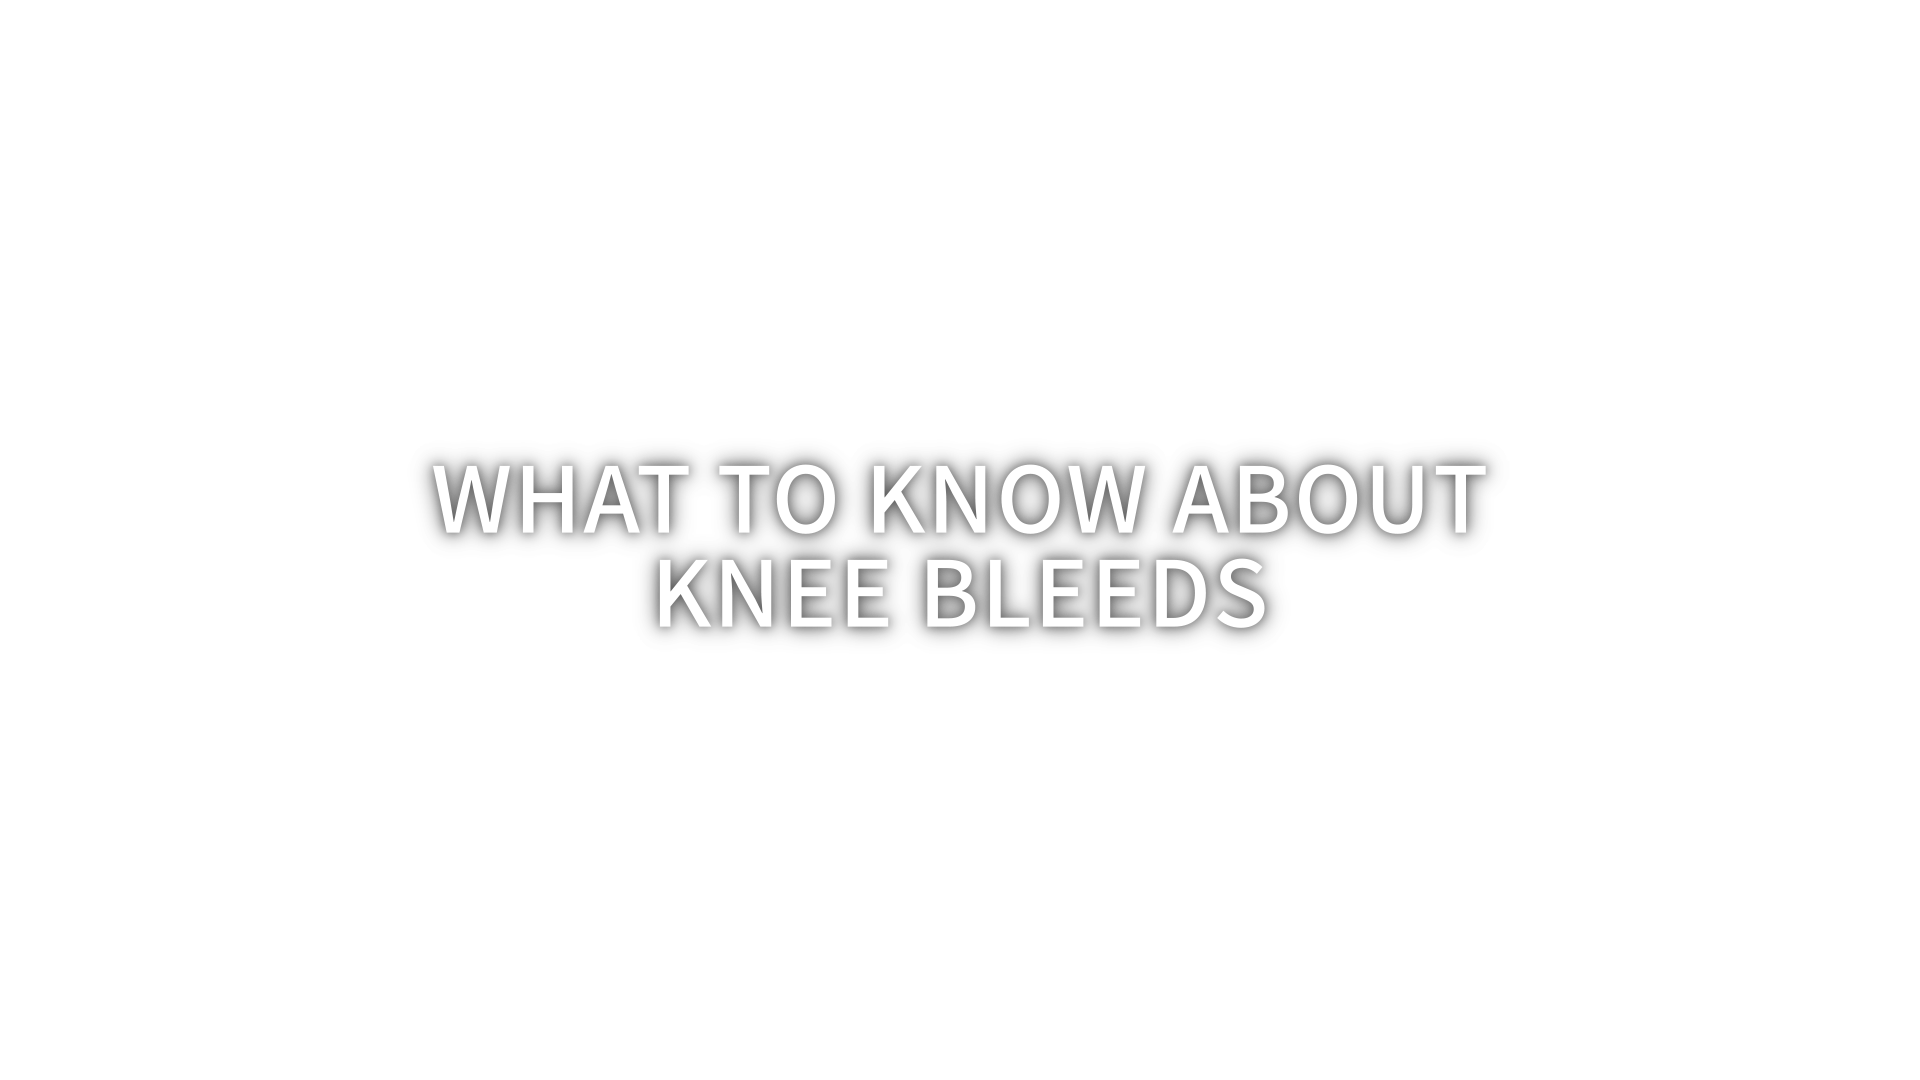 What to know about knee bleeds